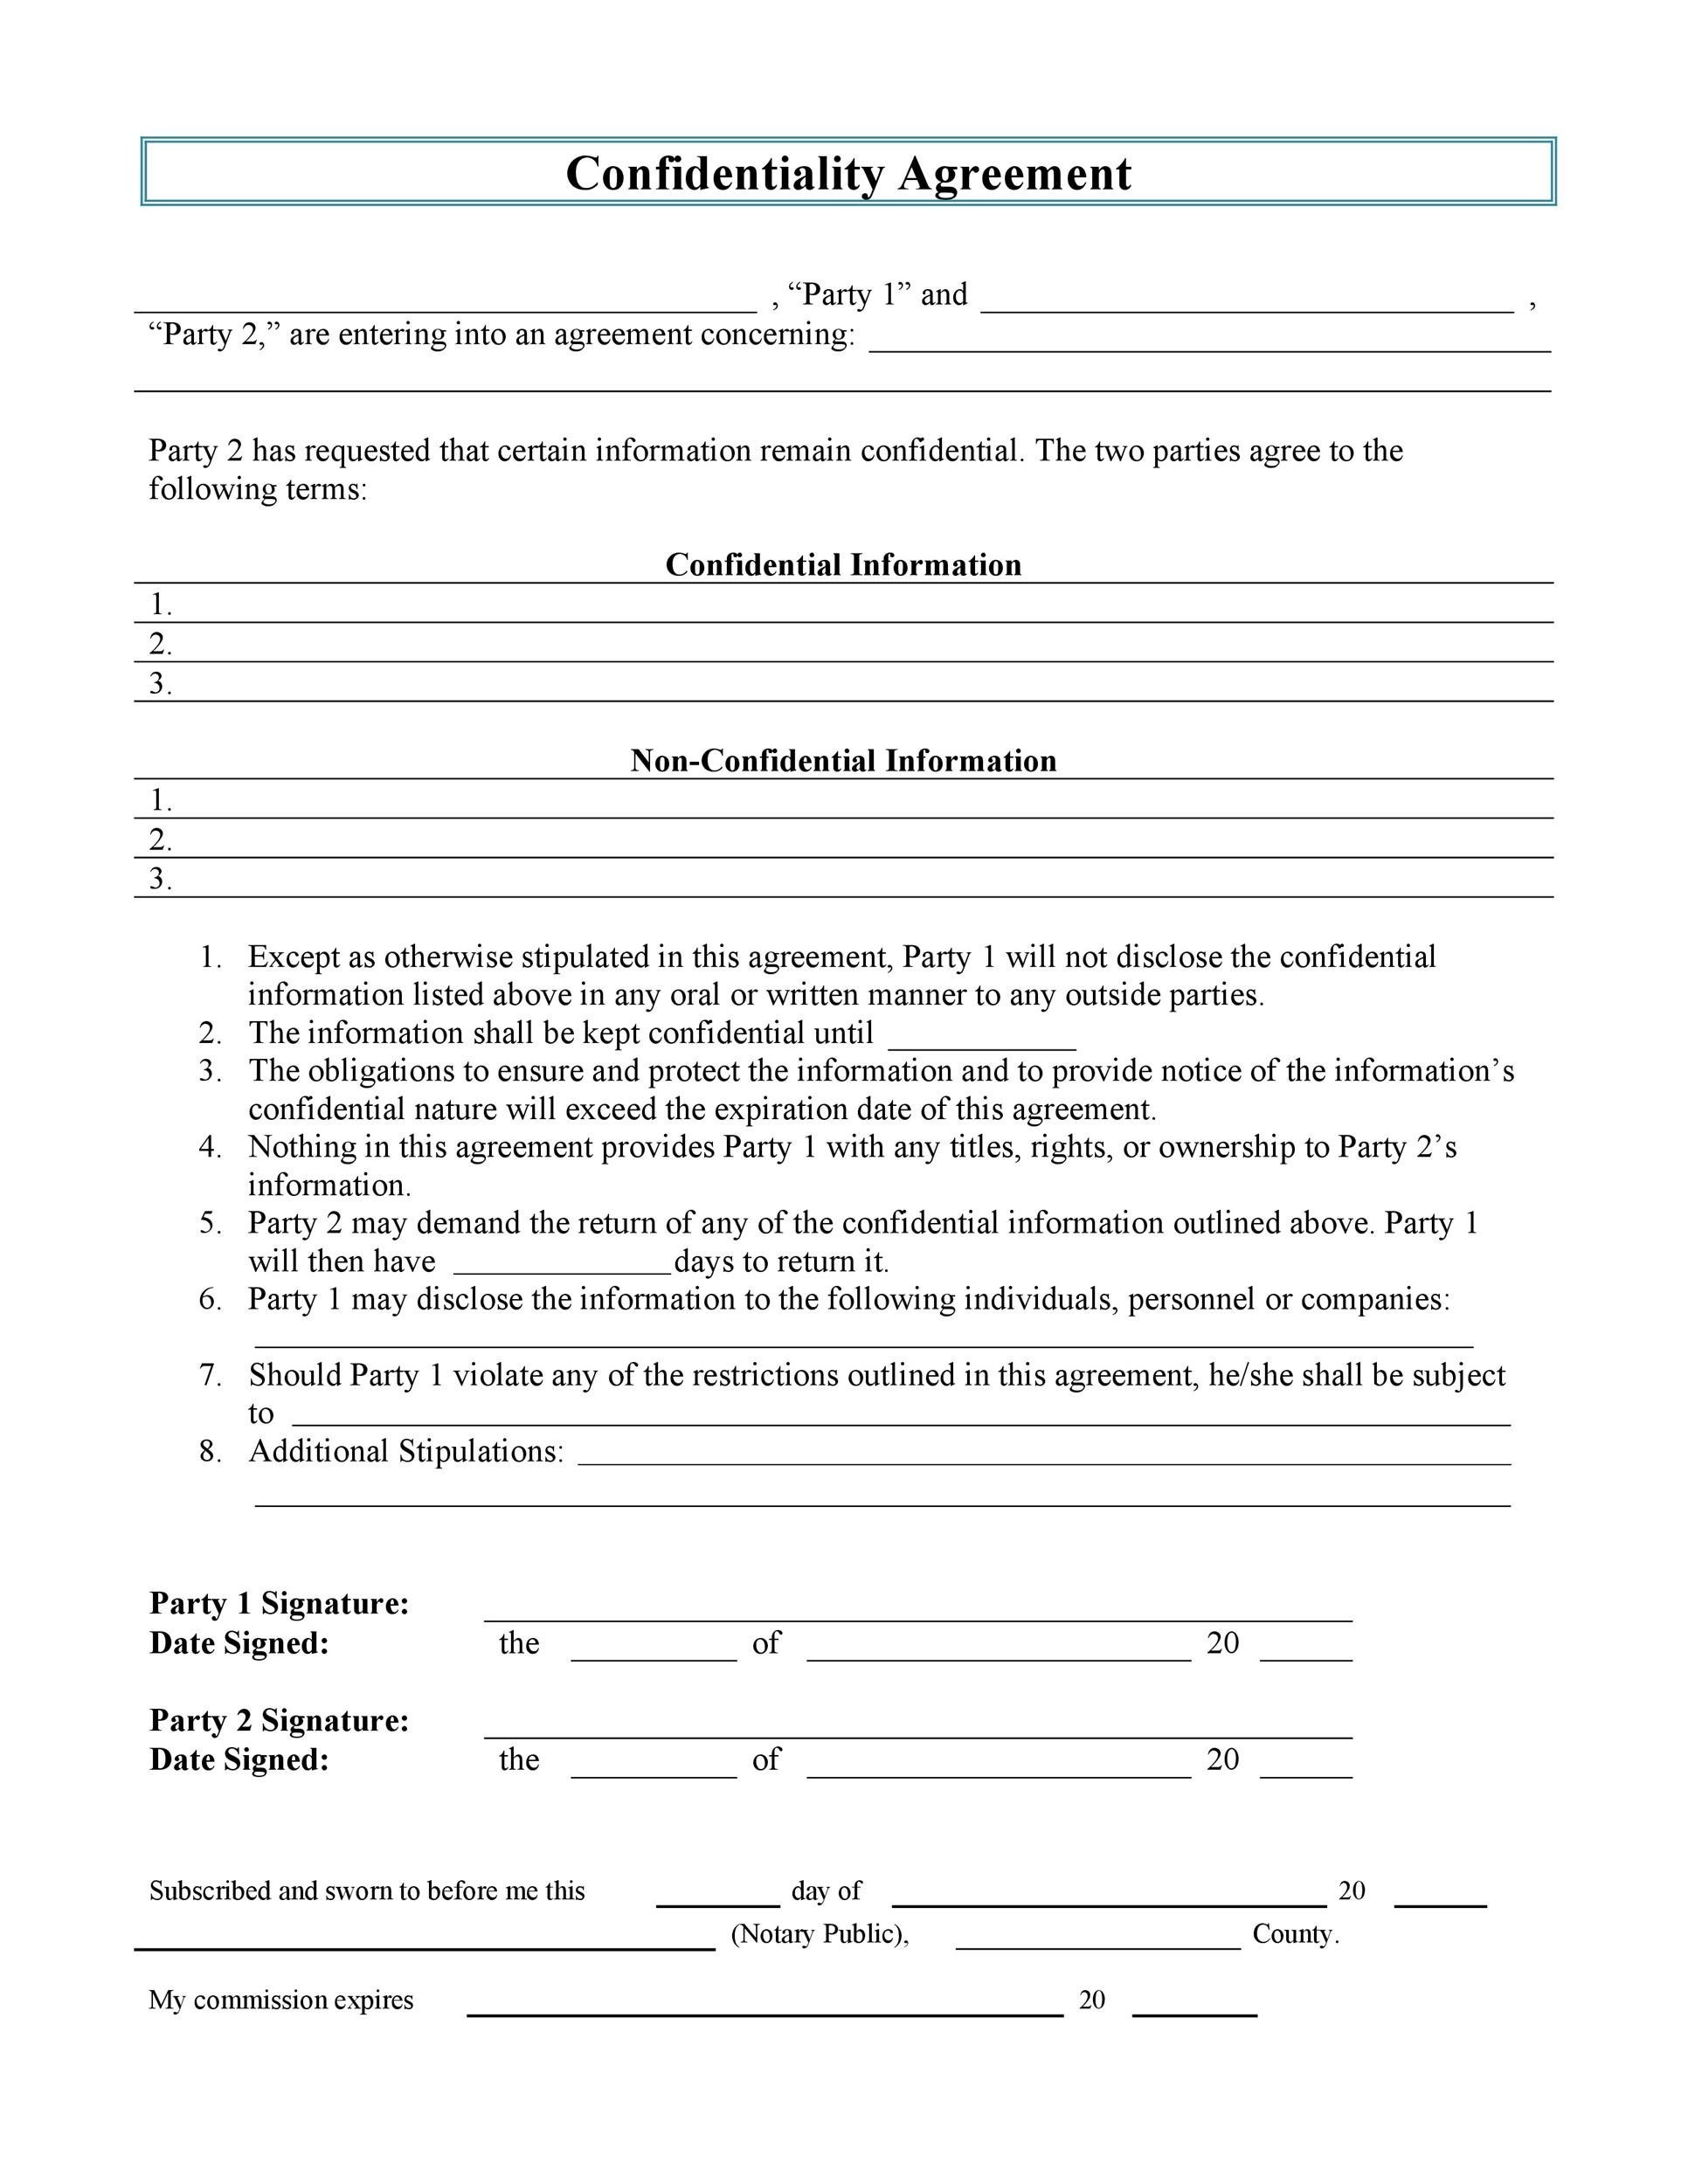 Free Confidentiality Agreement Template from templatelab.com